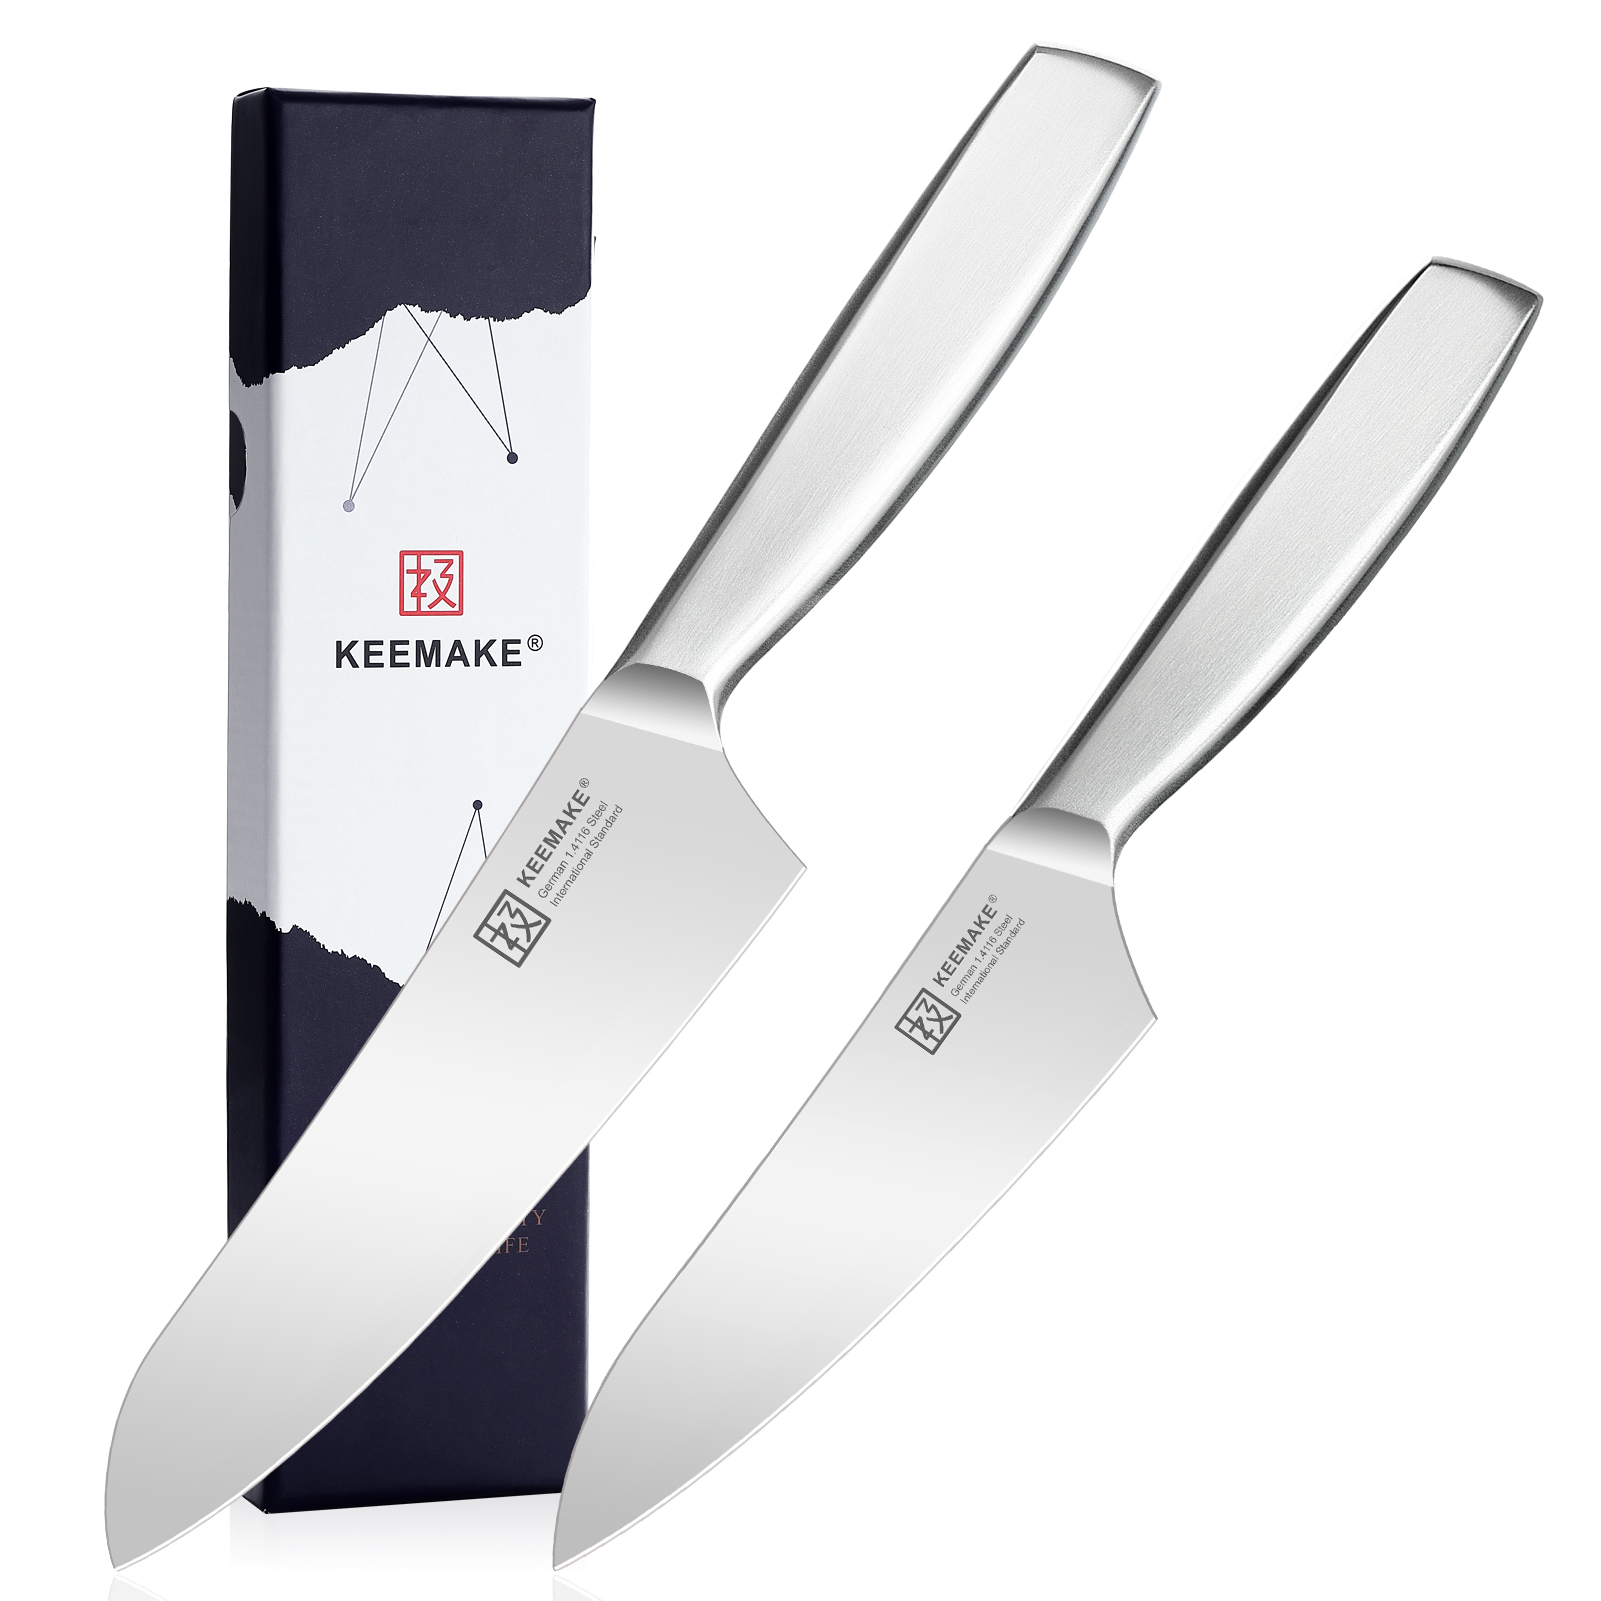 KEEMAKE 2pcs kitchen knife set high carbon stainless steel 1.4116 for meat & vegetable cutting